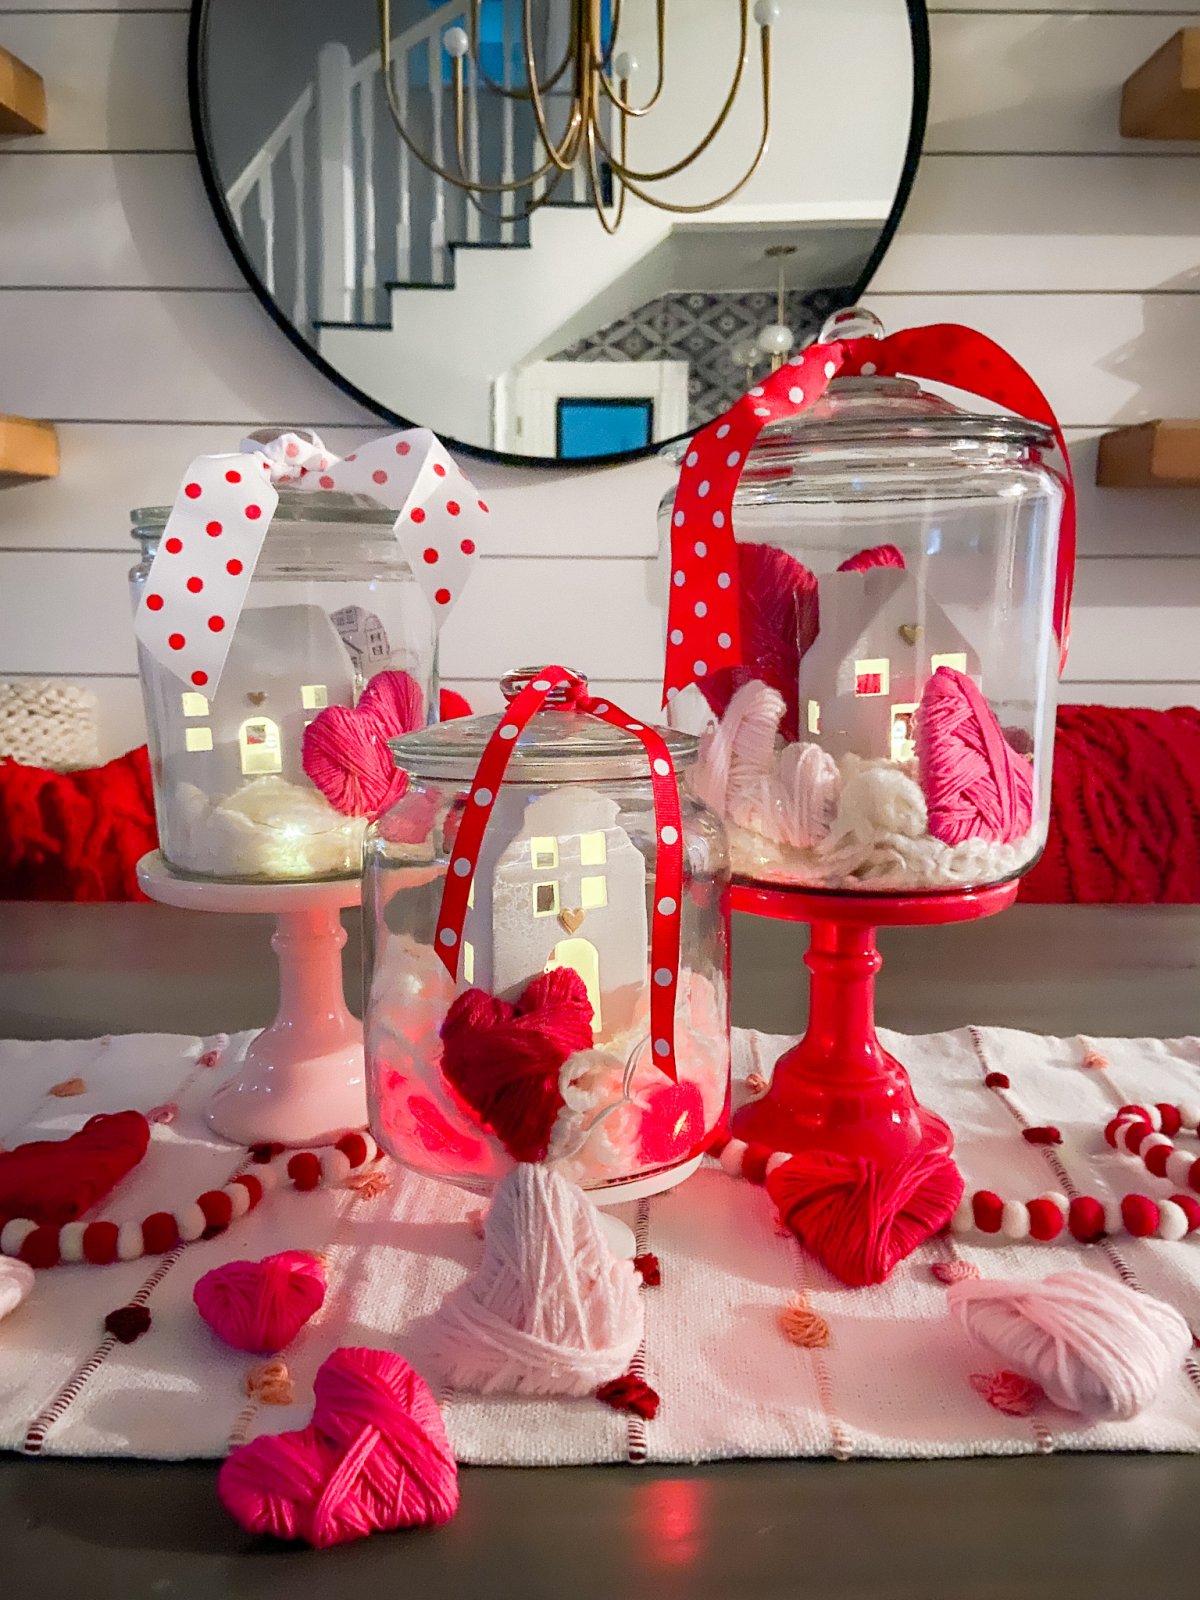 Valentine's Day Yarn-Wrap Cardboard Hearts + Centerpiece. Yarn-wrapped cardboard hearts are so simple to make and can be used for all kinds of Valentine's Day crafts. Add them to clear jars for a pretty centerpiece idea!